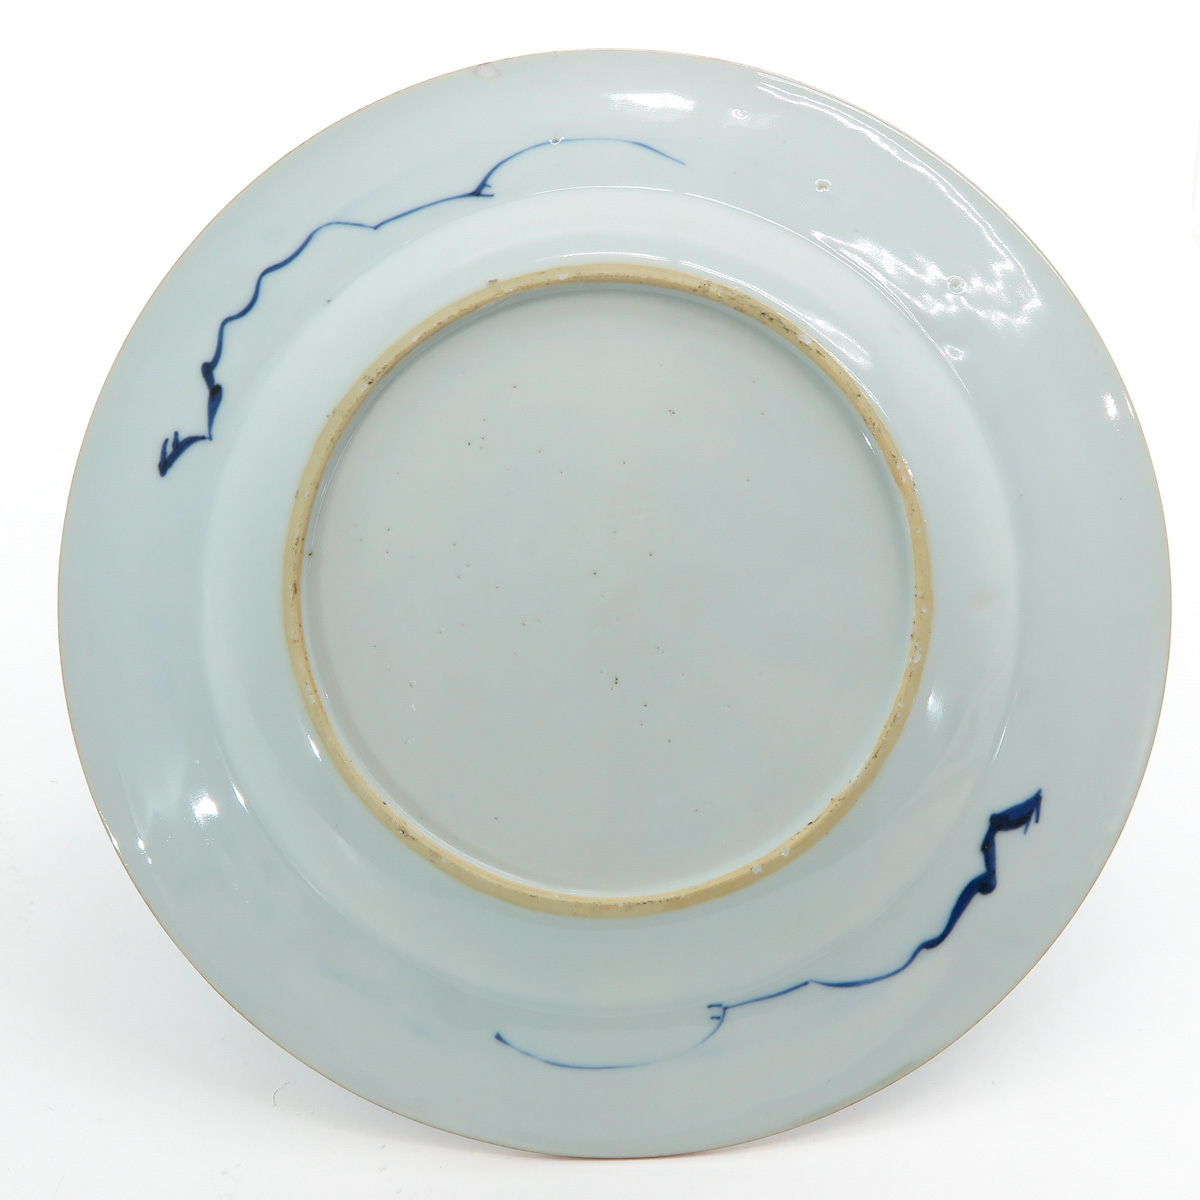 A Blue and White Decor Plate - Image 2 of 3